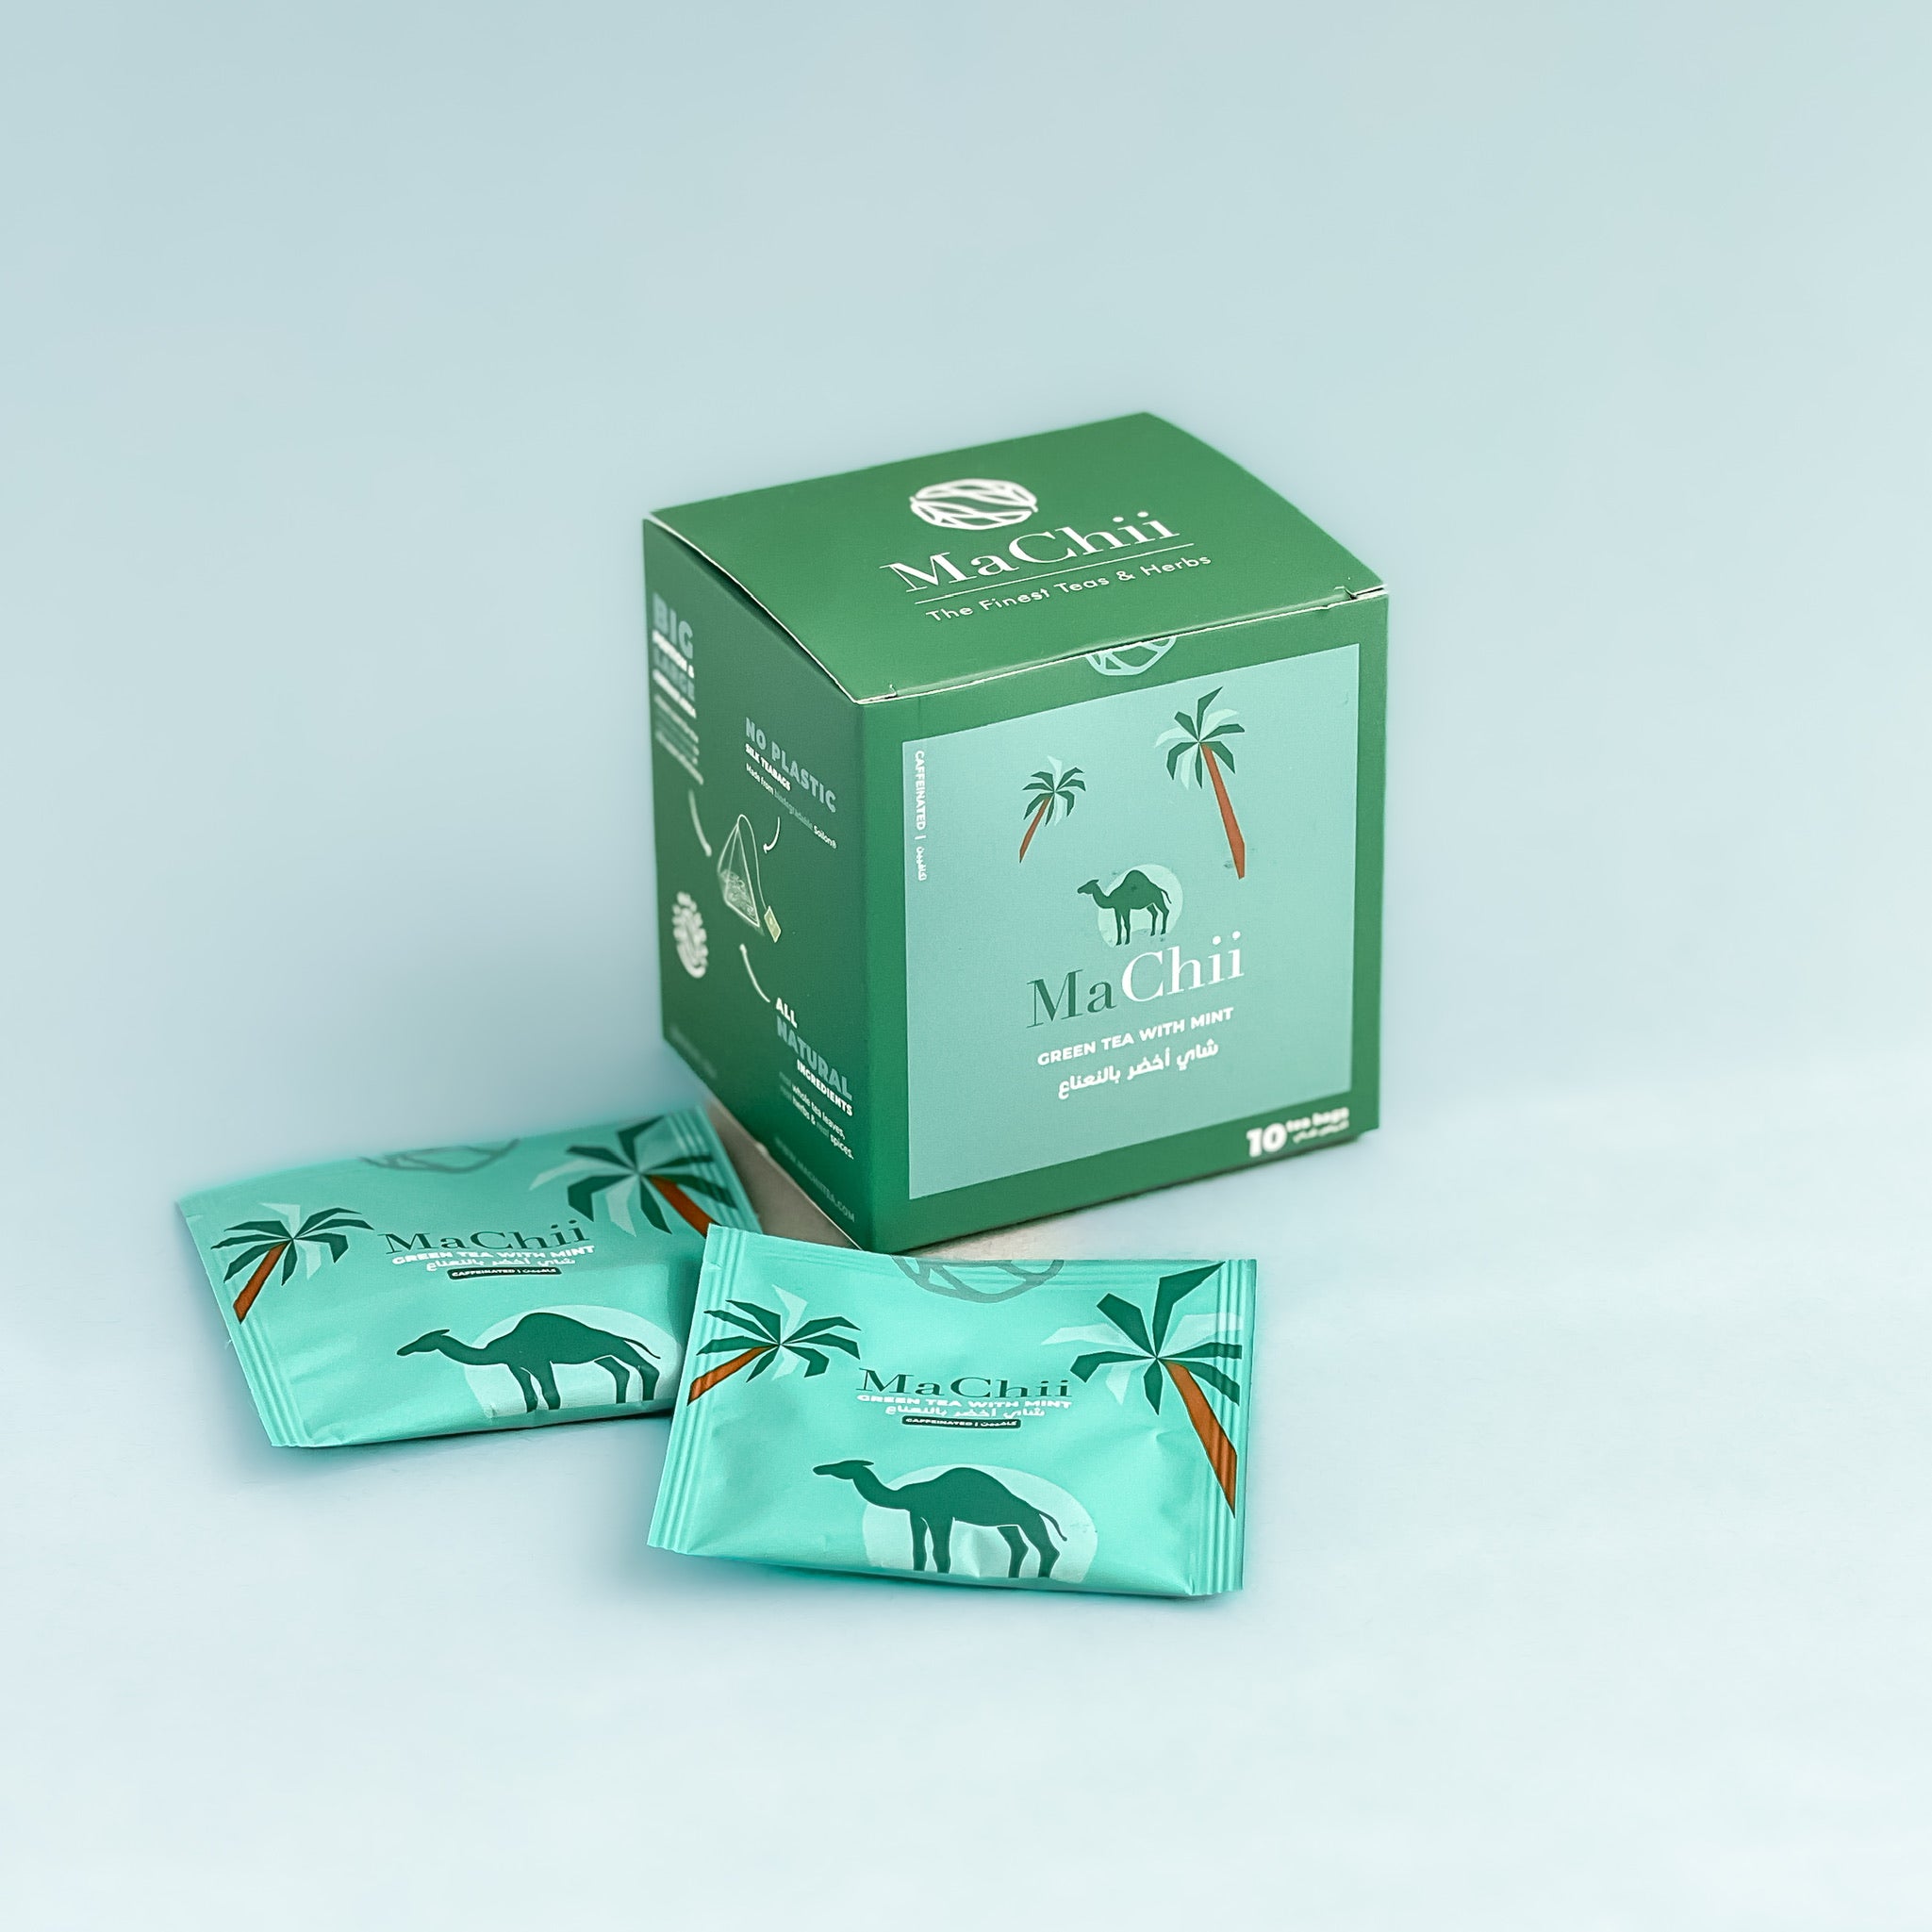 organic gunpowder green tea with mint. the packaging has a pickier of a saudi camel and palm trees. the teabags are biodegradable and organic